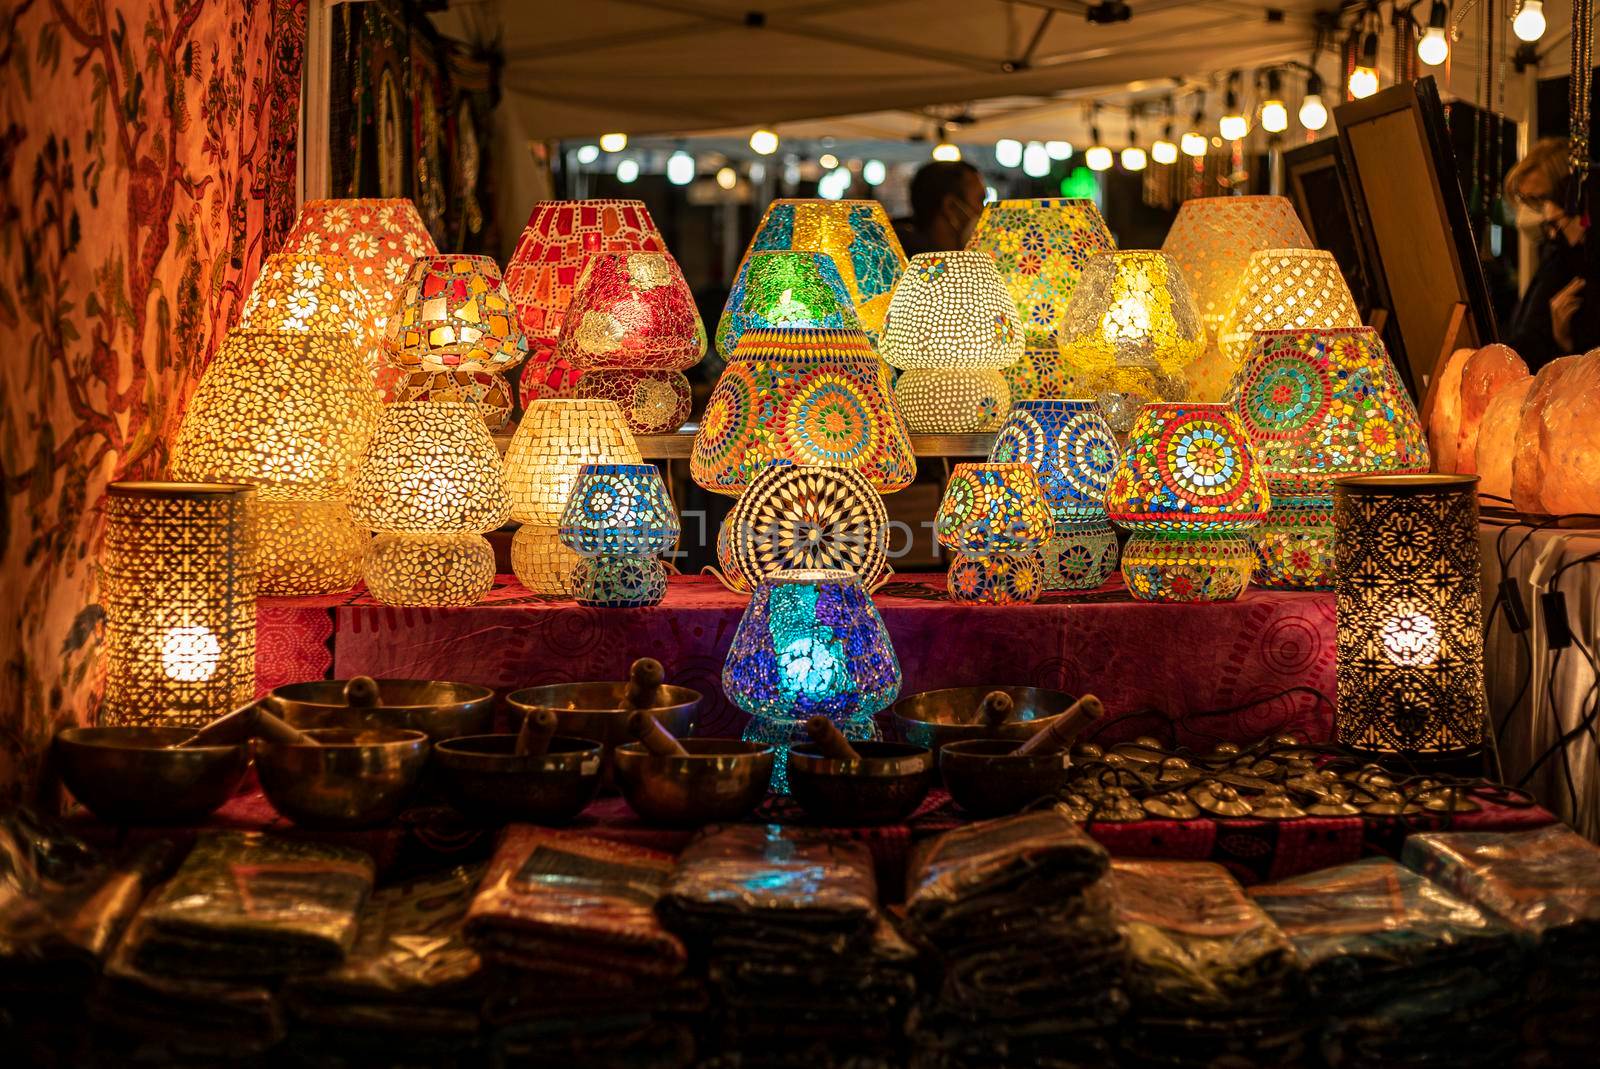 Arabic exhibition lamps in a market by pippocarlot